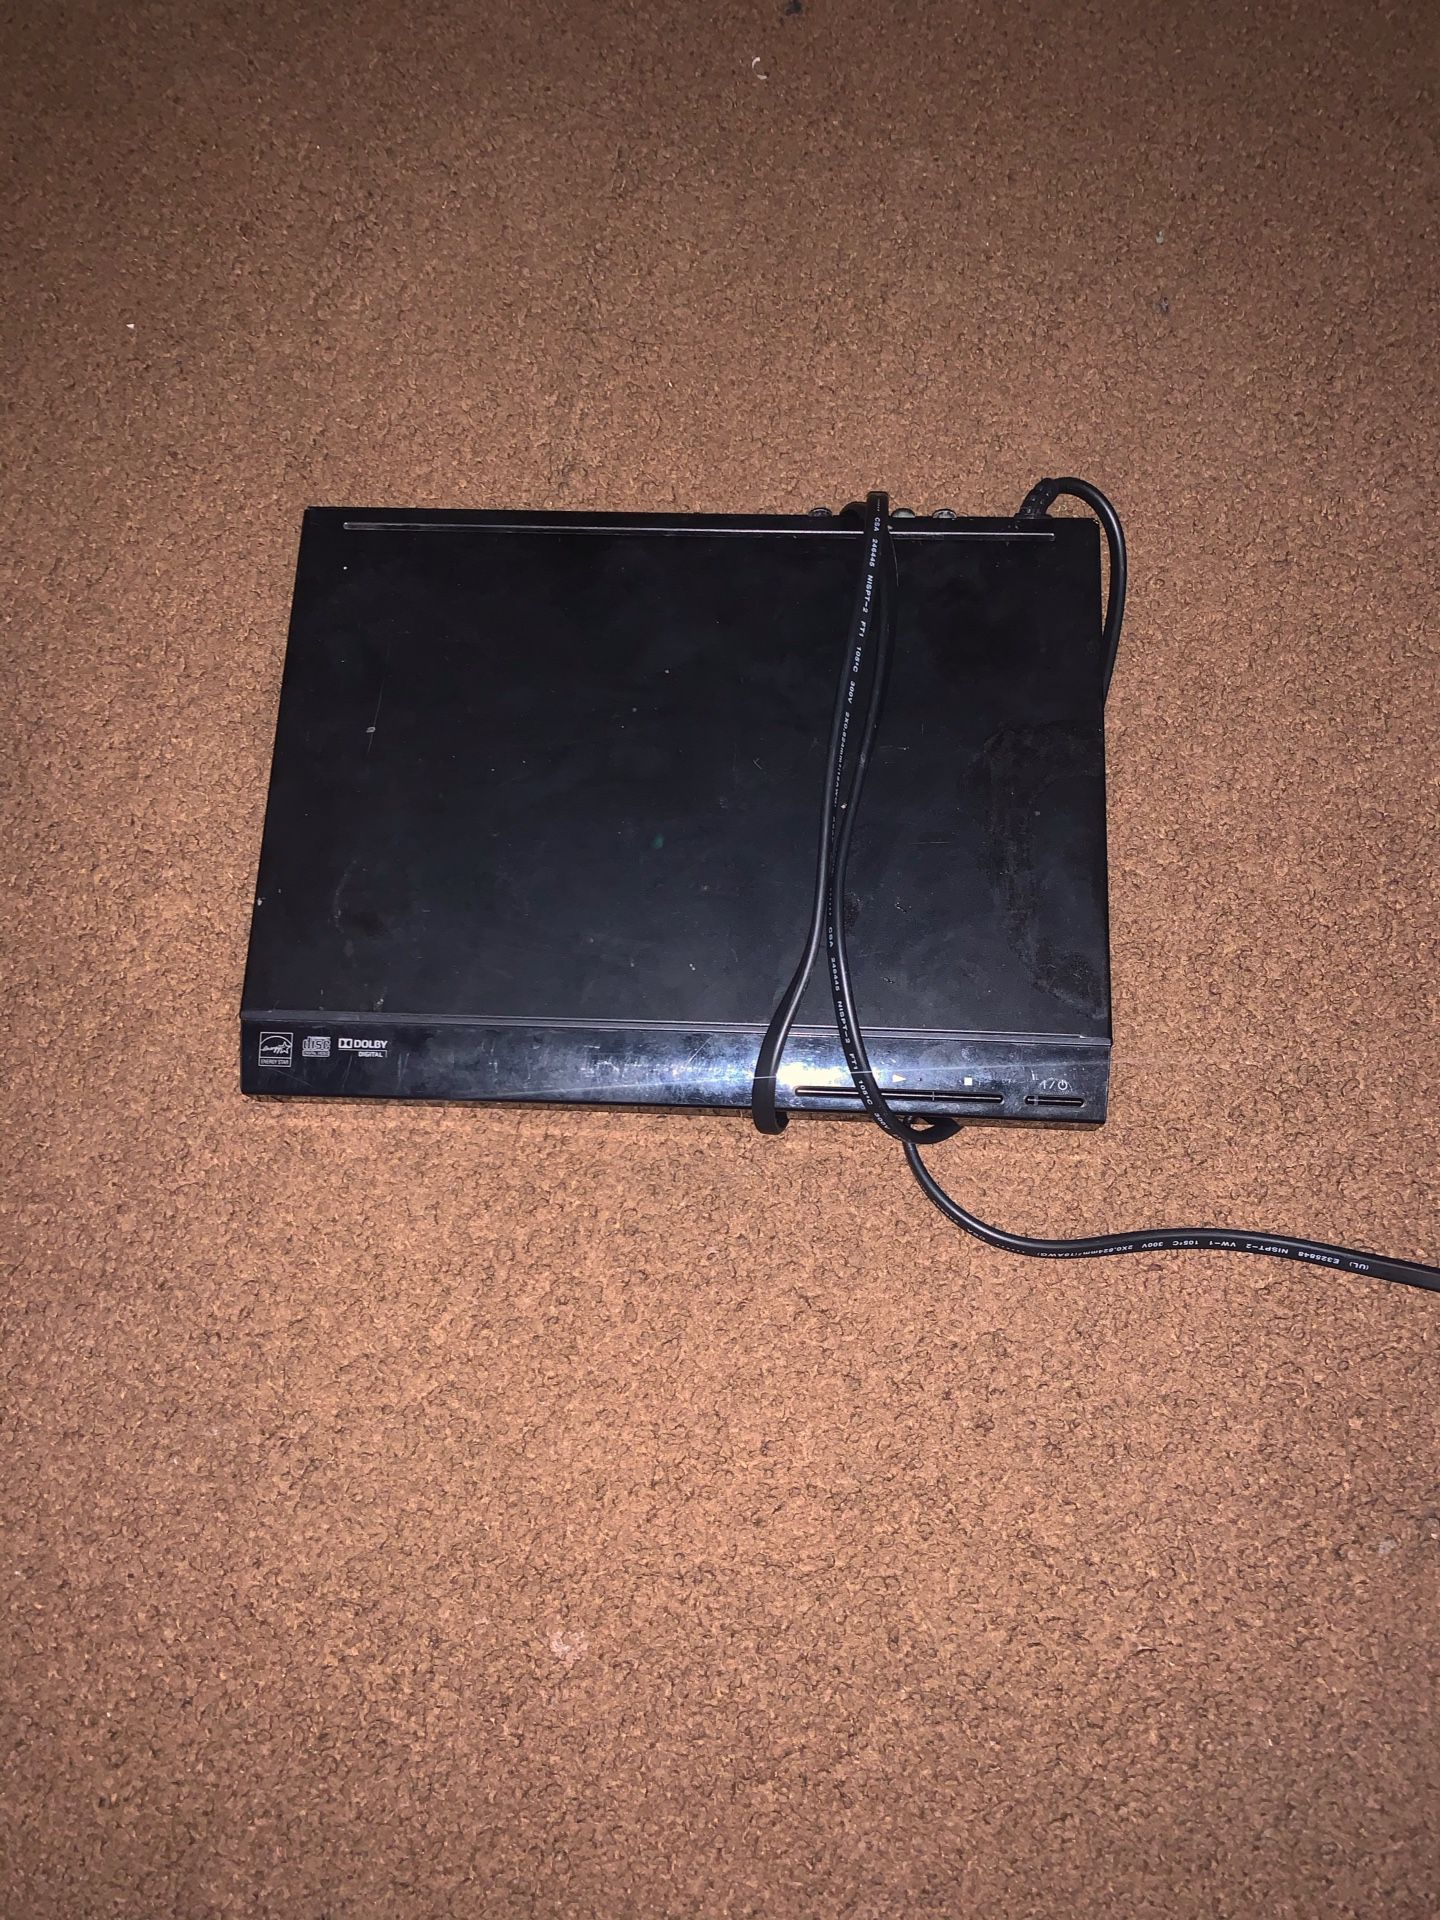 Sony DVD player used great condition no remote